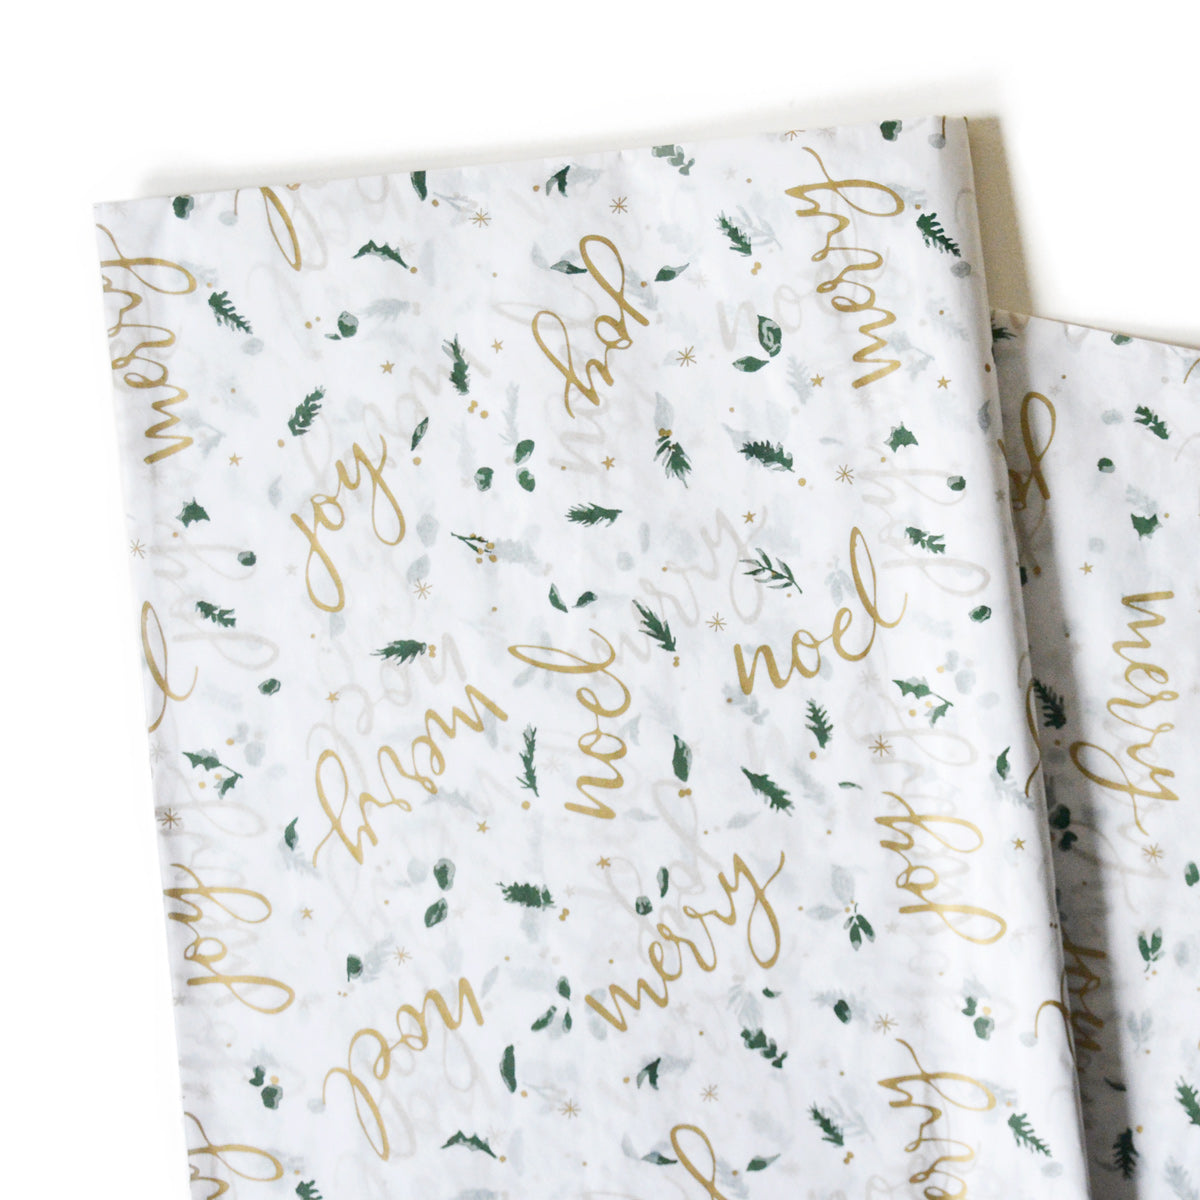 Christmas Scripts Patterned Tissue Paper - Modern Winter Holiday Gift  Wrapping & DIY Projects Supplies - GenWooShop